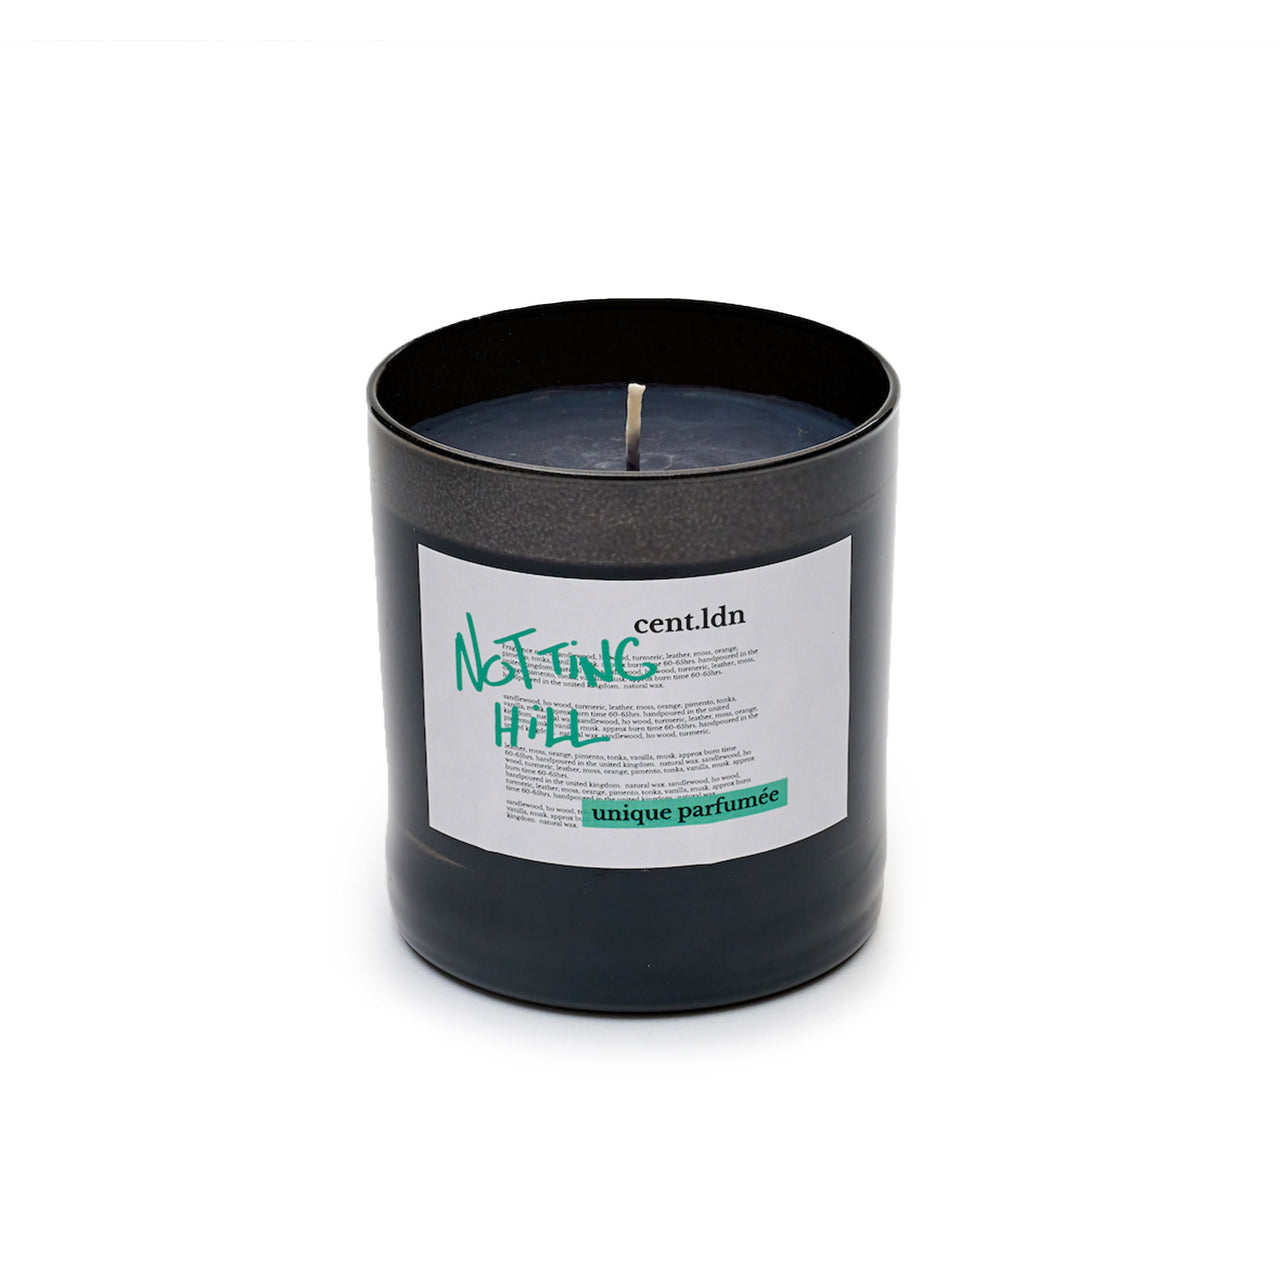 Notting Hill Perfumed Candle